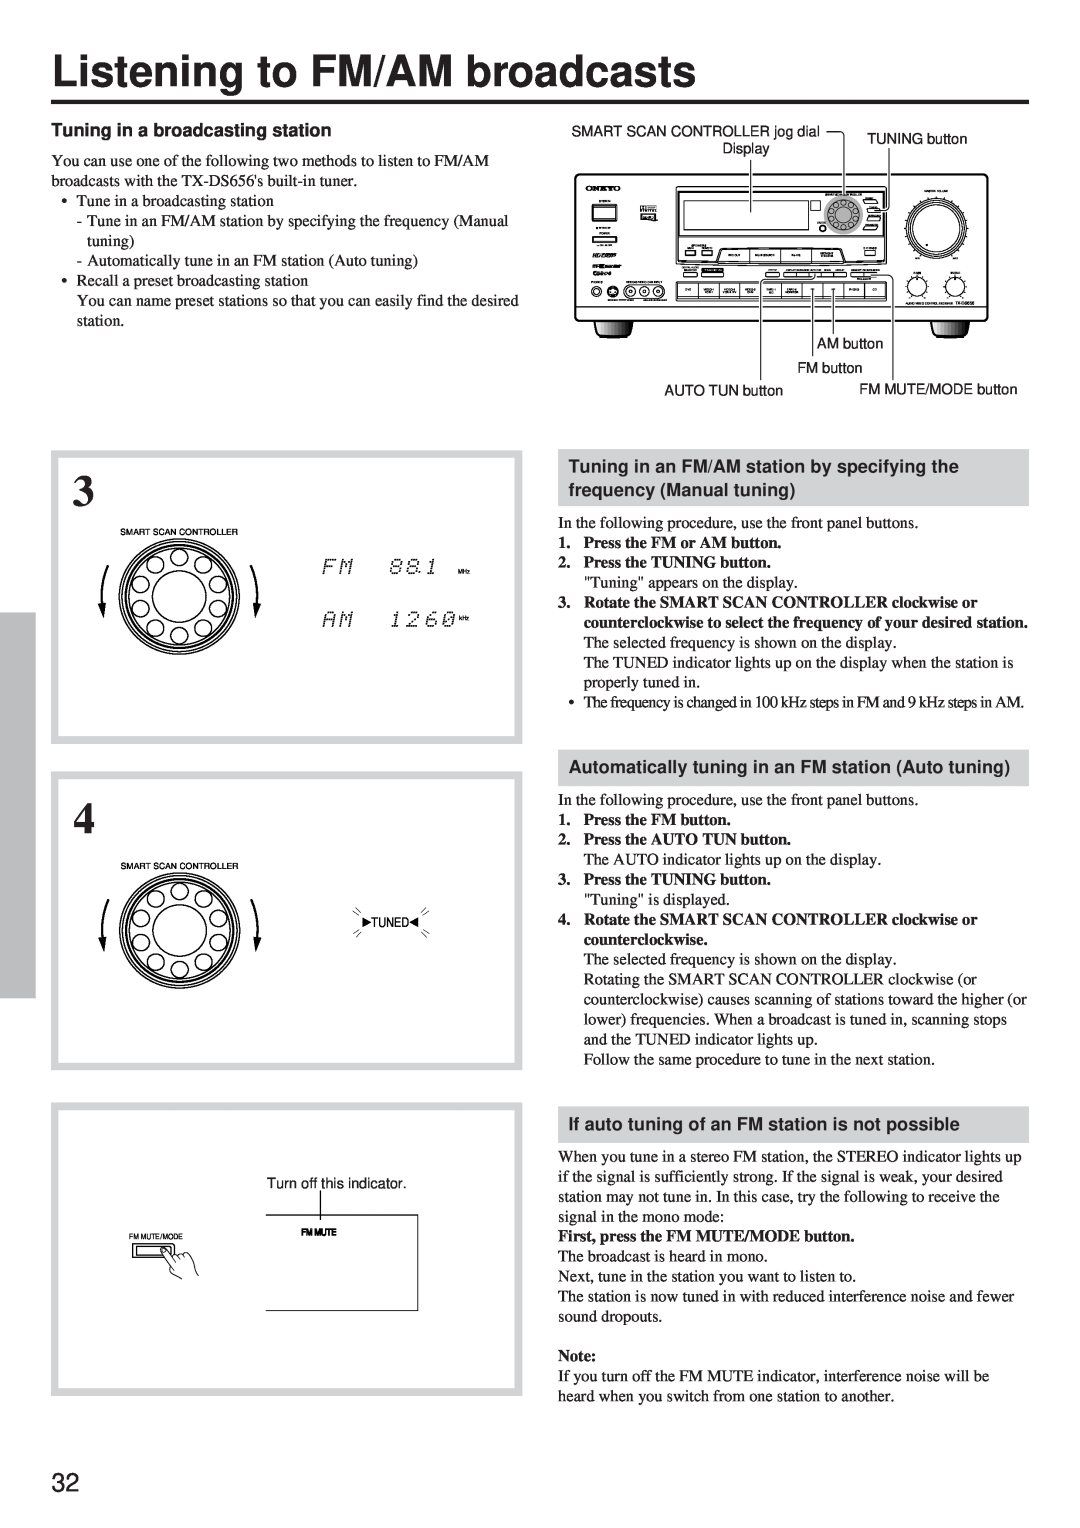 Onkyo TX-DS656 instruction manual Listening to FM/AM broadcasts, Tuning in a broadcasting station 